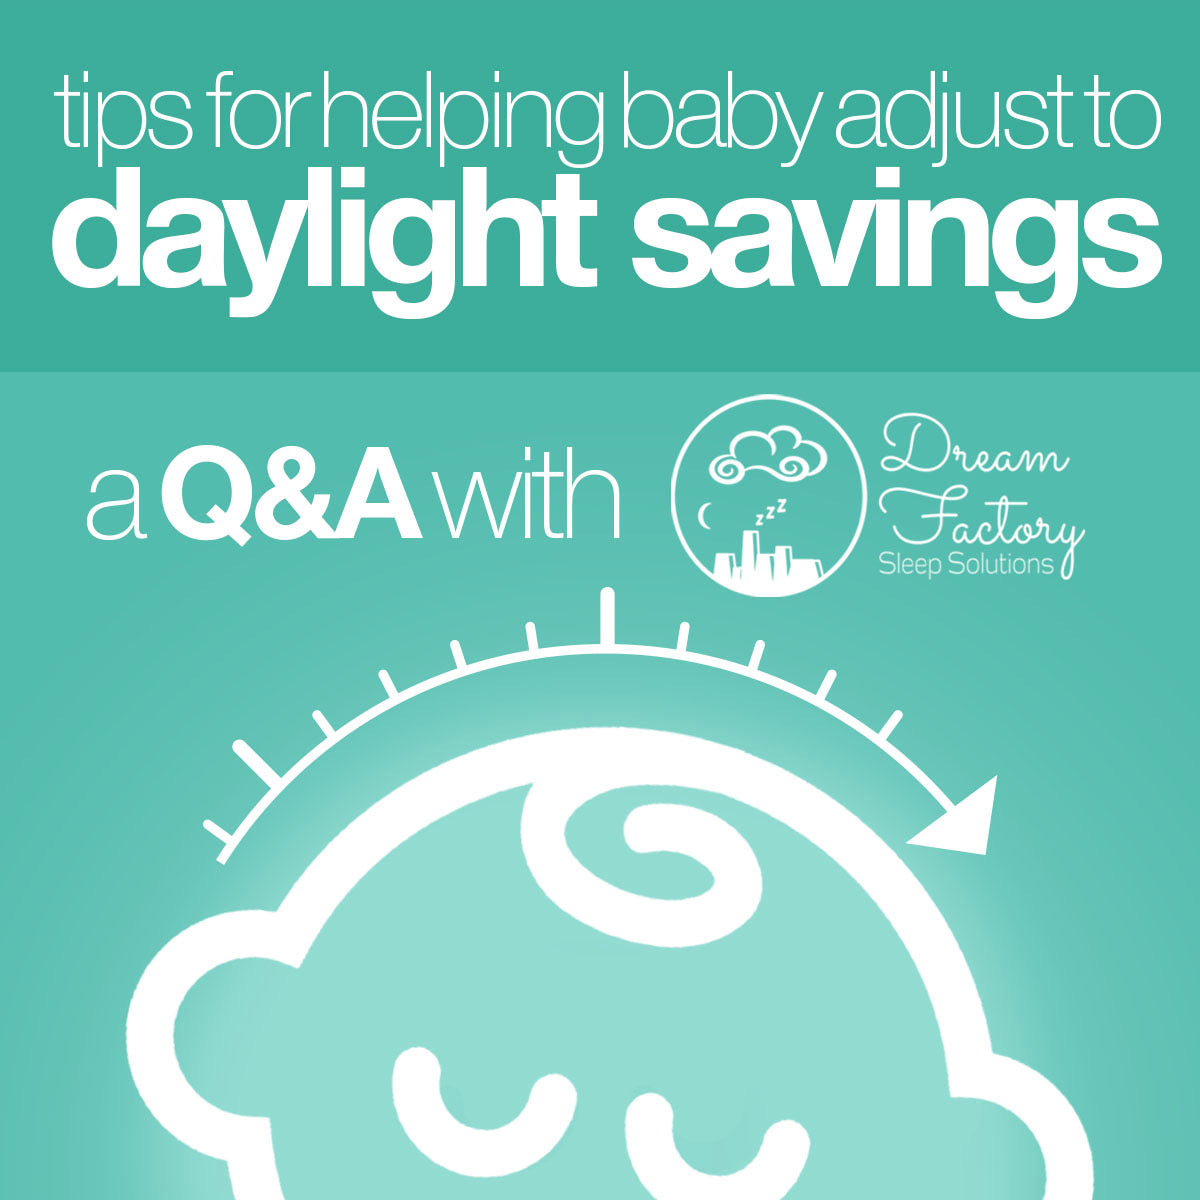 Tips for Helping Baby Adjust to Daylight Savings